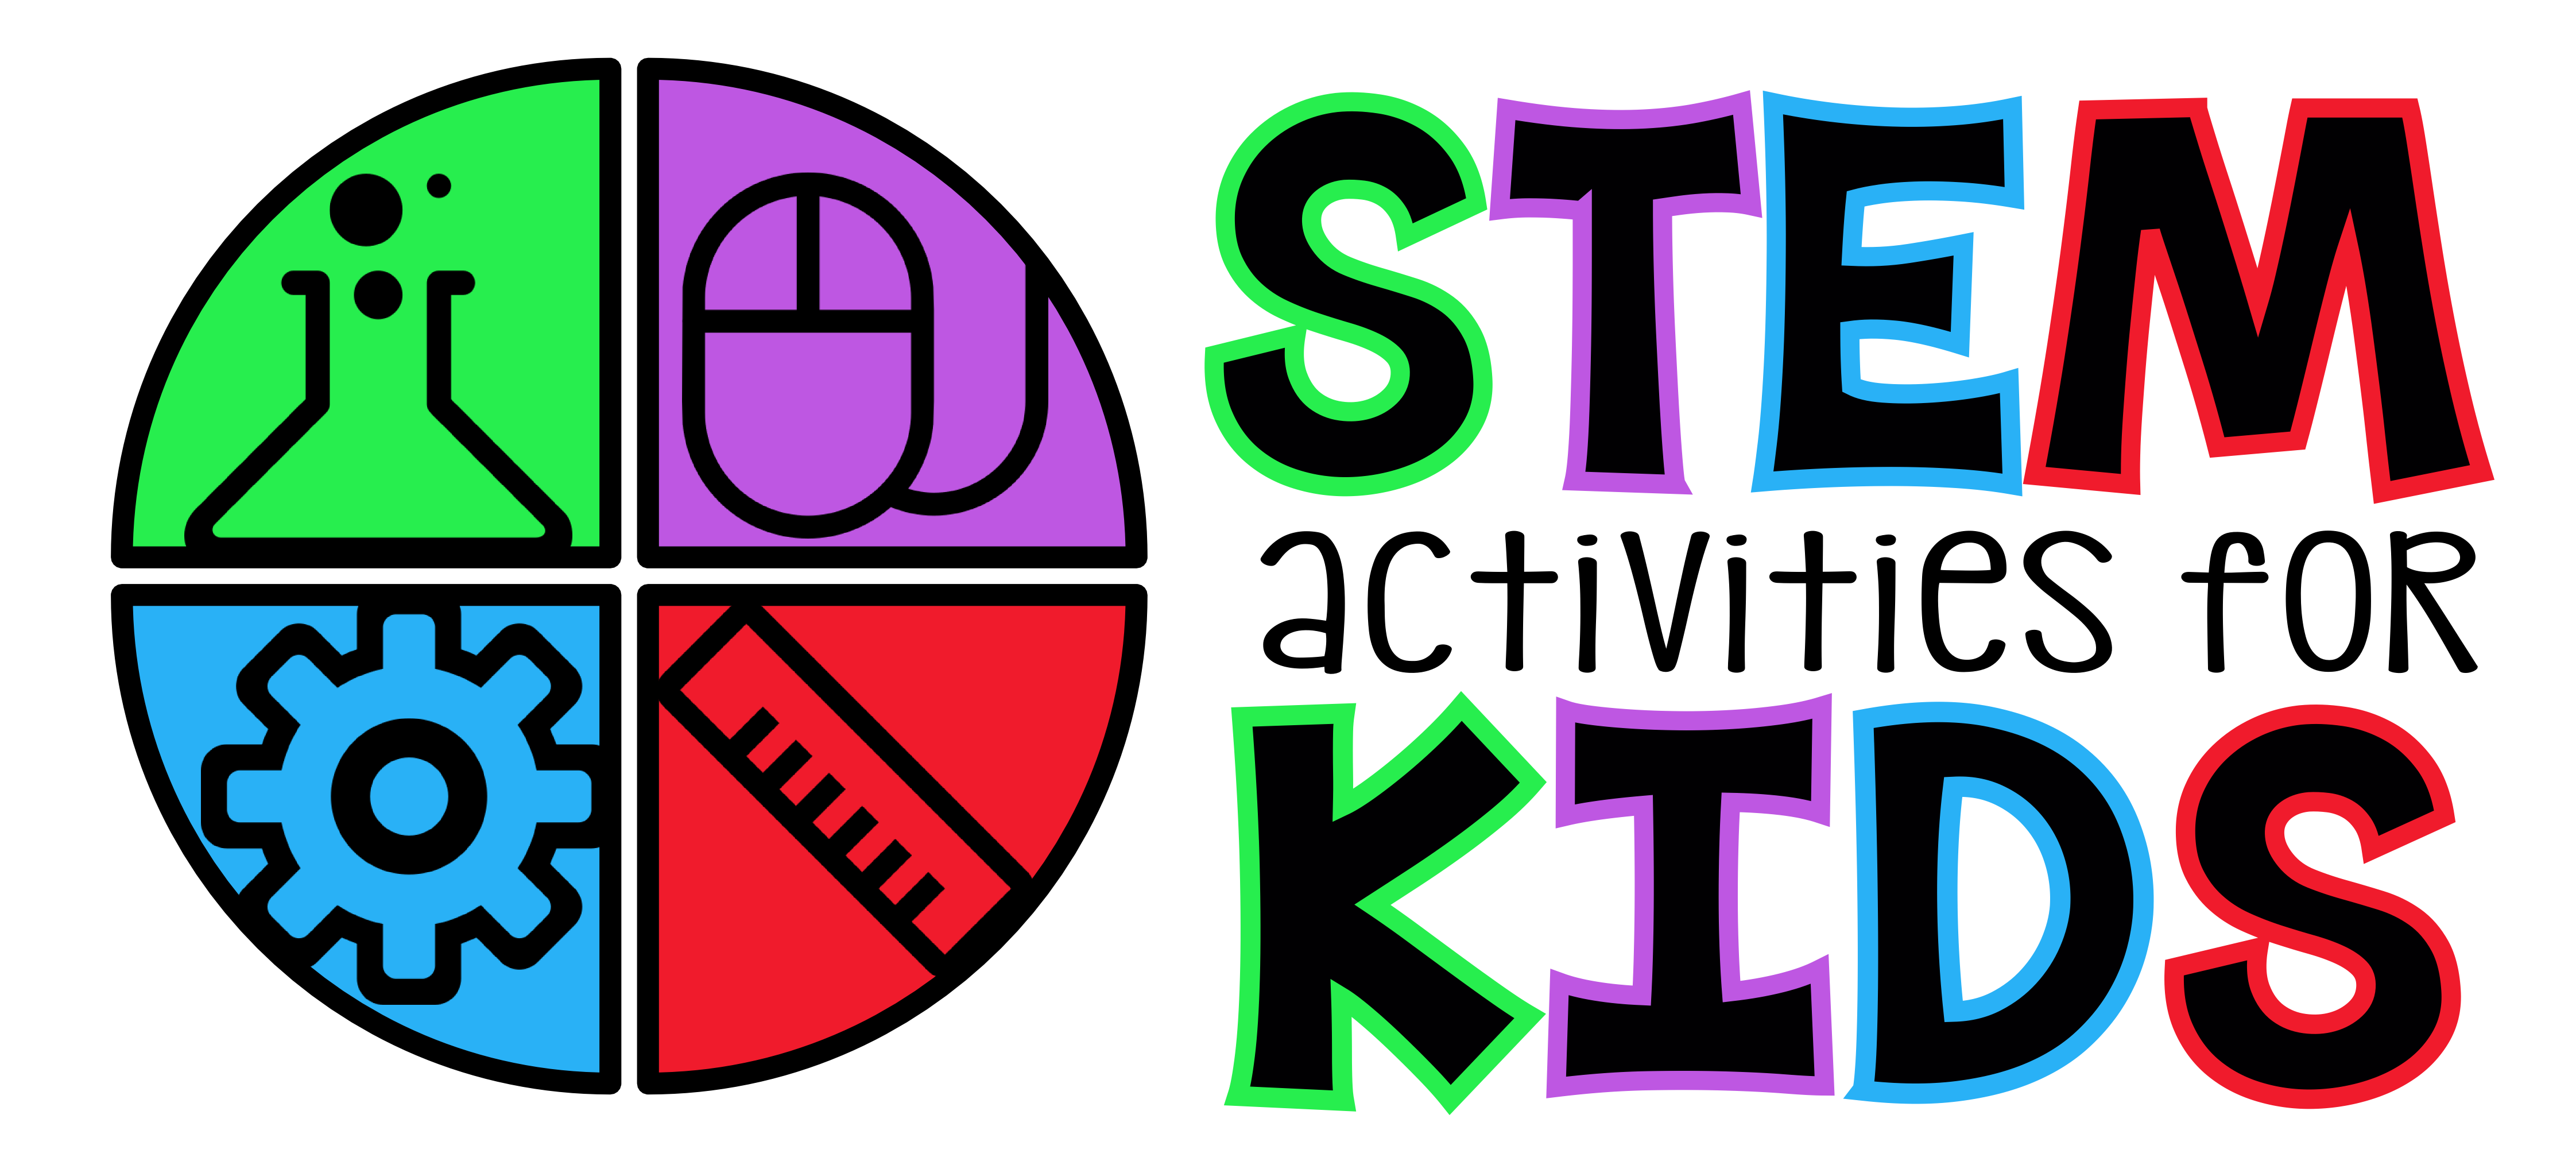 Steam activities for kids фото 19